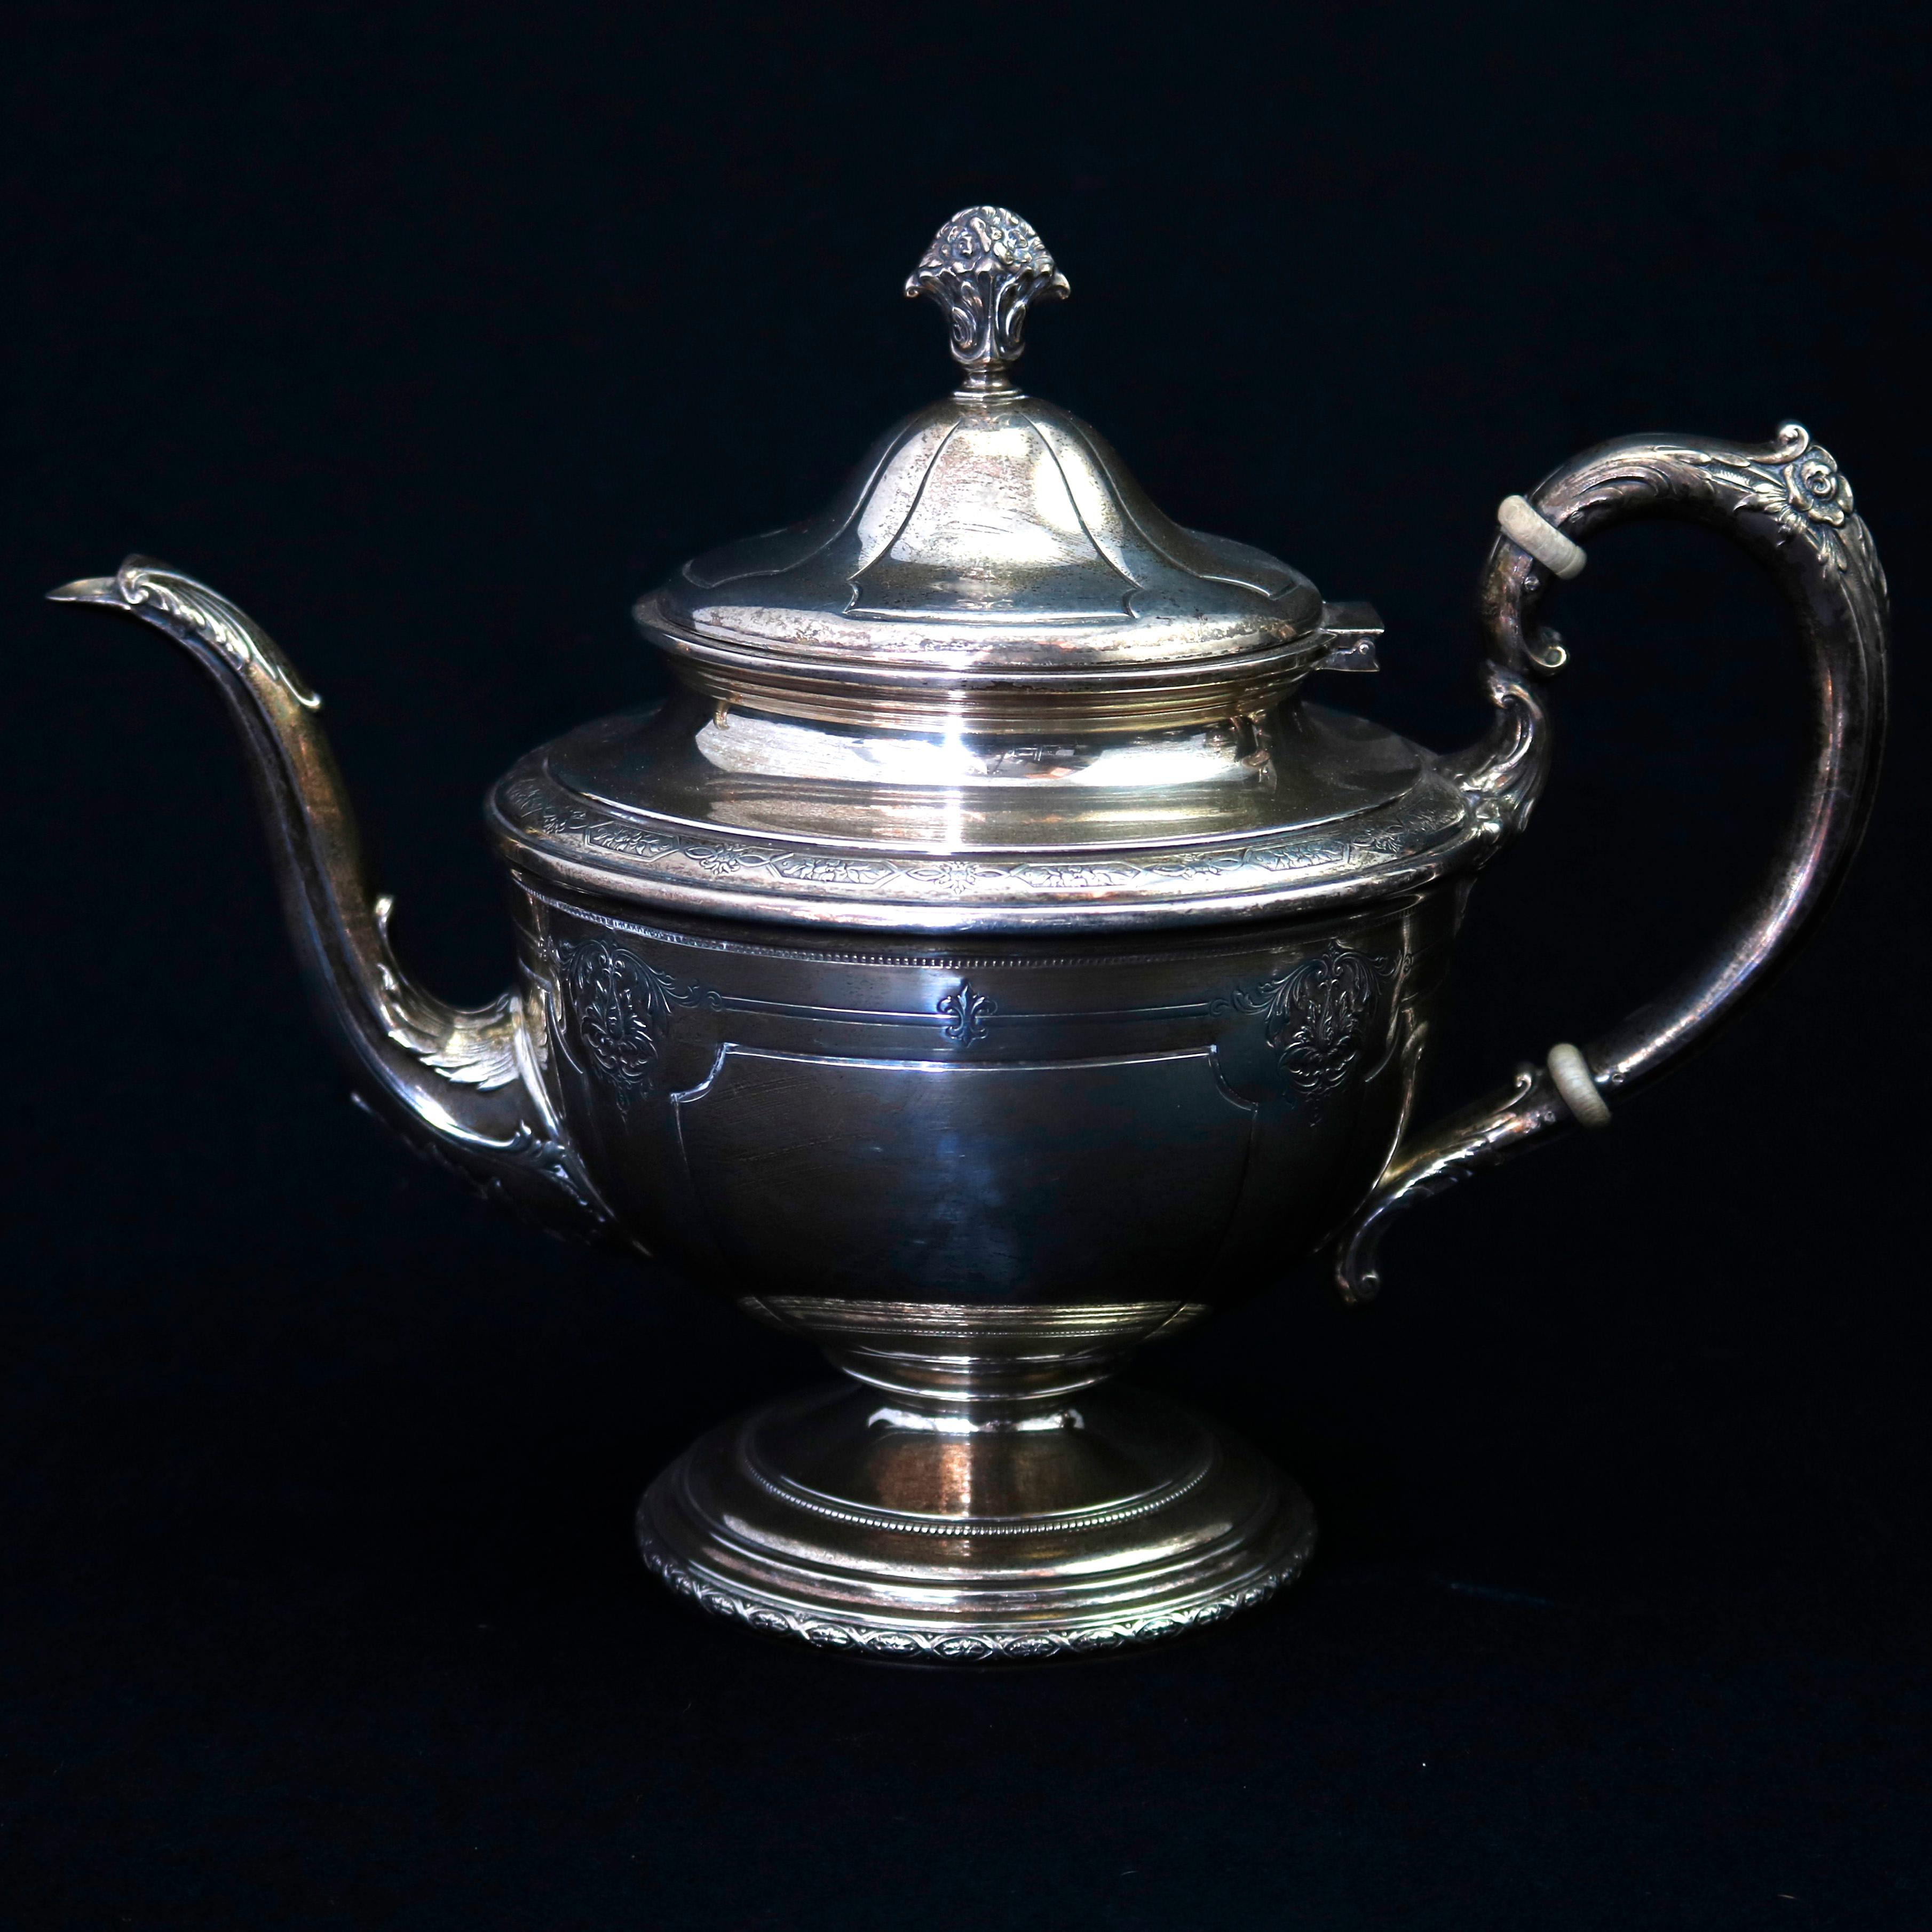 An antique French Louis XIV sterling silver tea set by Tole offers four pieces with panier de fleurs form finials surmounting vessels with embossed and engraved foliate elements and Fleur de Lis with foliate form handles with insulators and raised